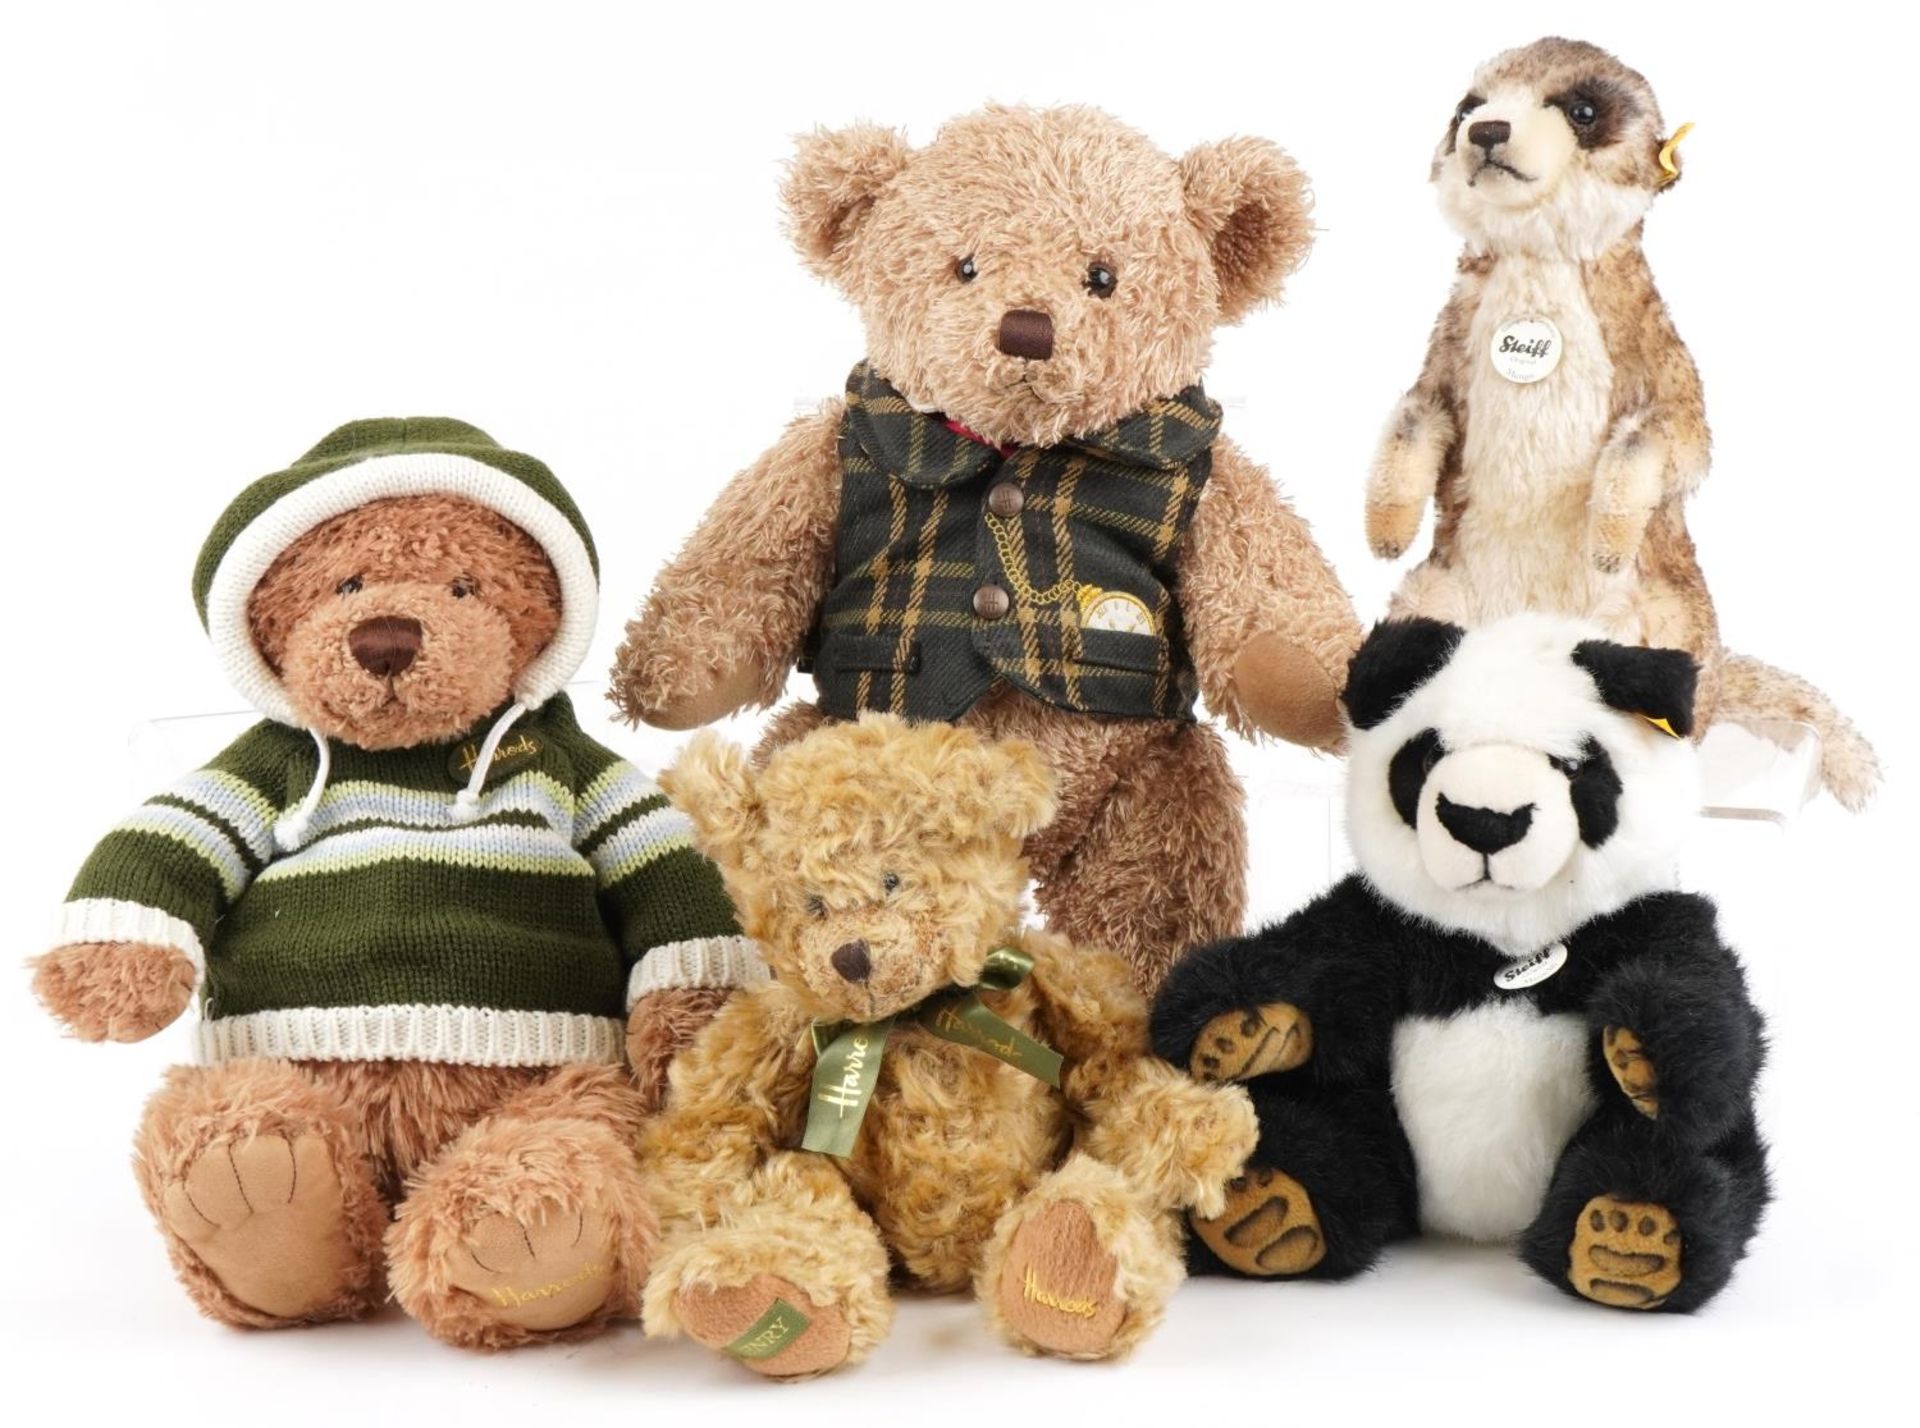 Three Harrod's teddy bears and two Steiff examples comprising Mungo the Meerkat and Manschli the